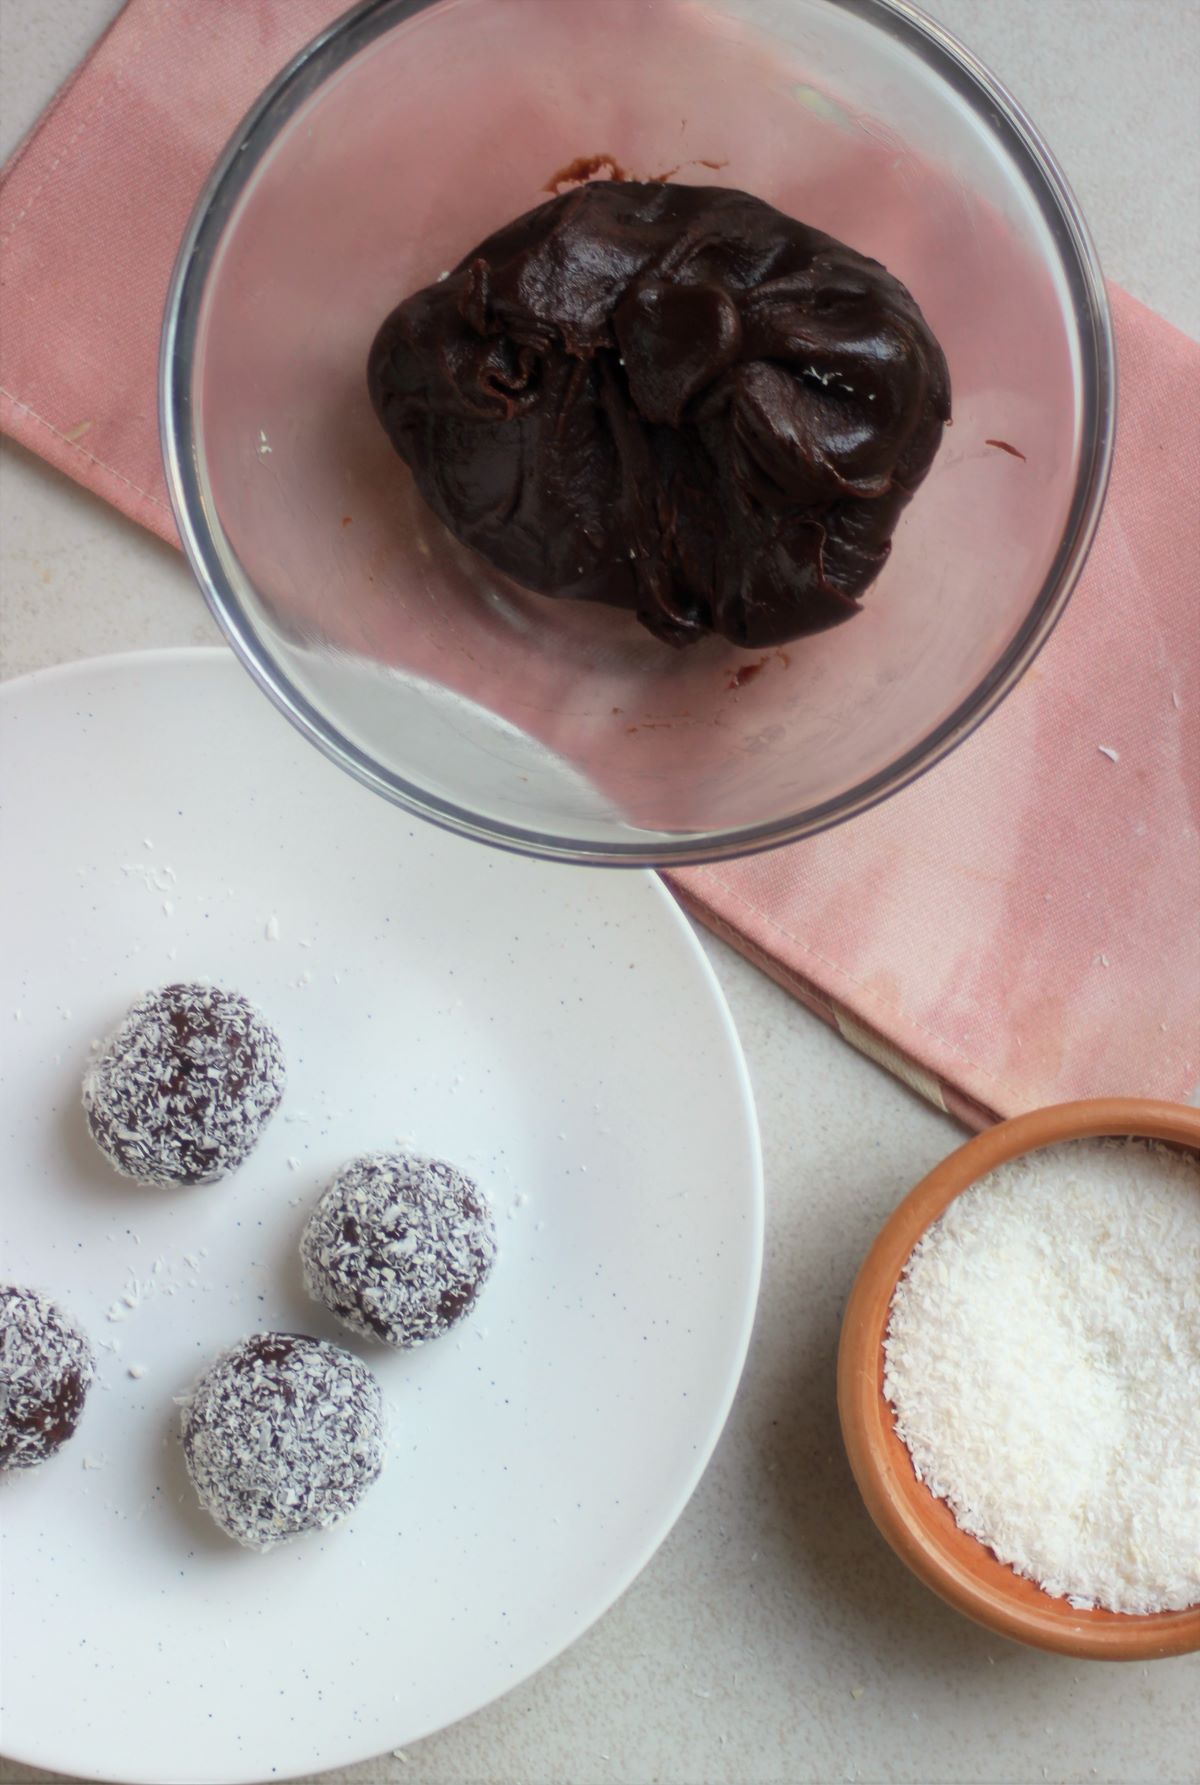 Glass bowl with a big chocolate ball, white plate with brigadeiros, bowl with shredded coconut.